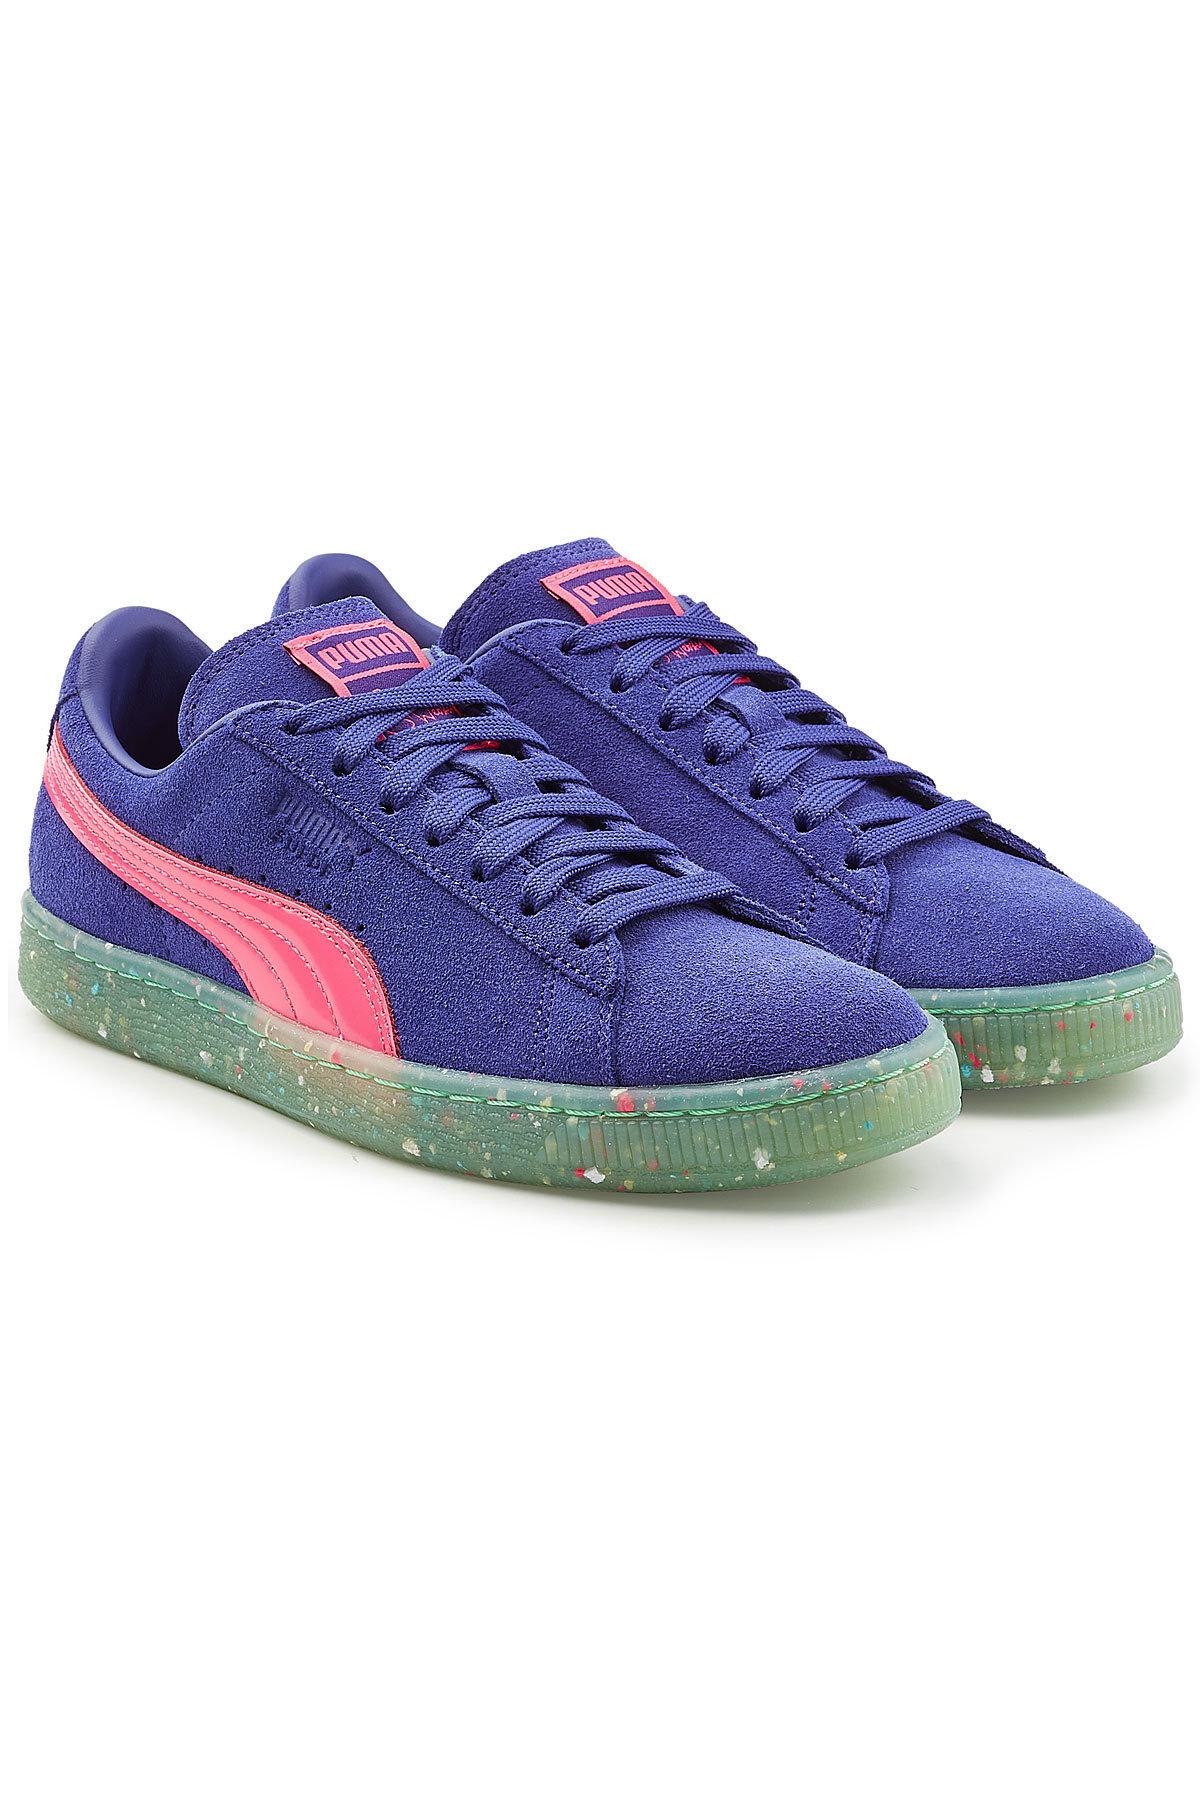 Puma Classic Sneakers With Leather And 